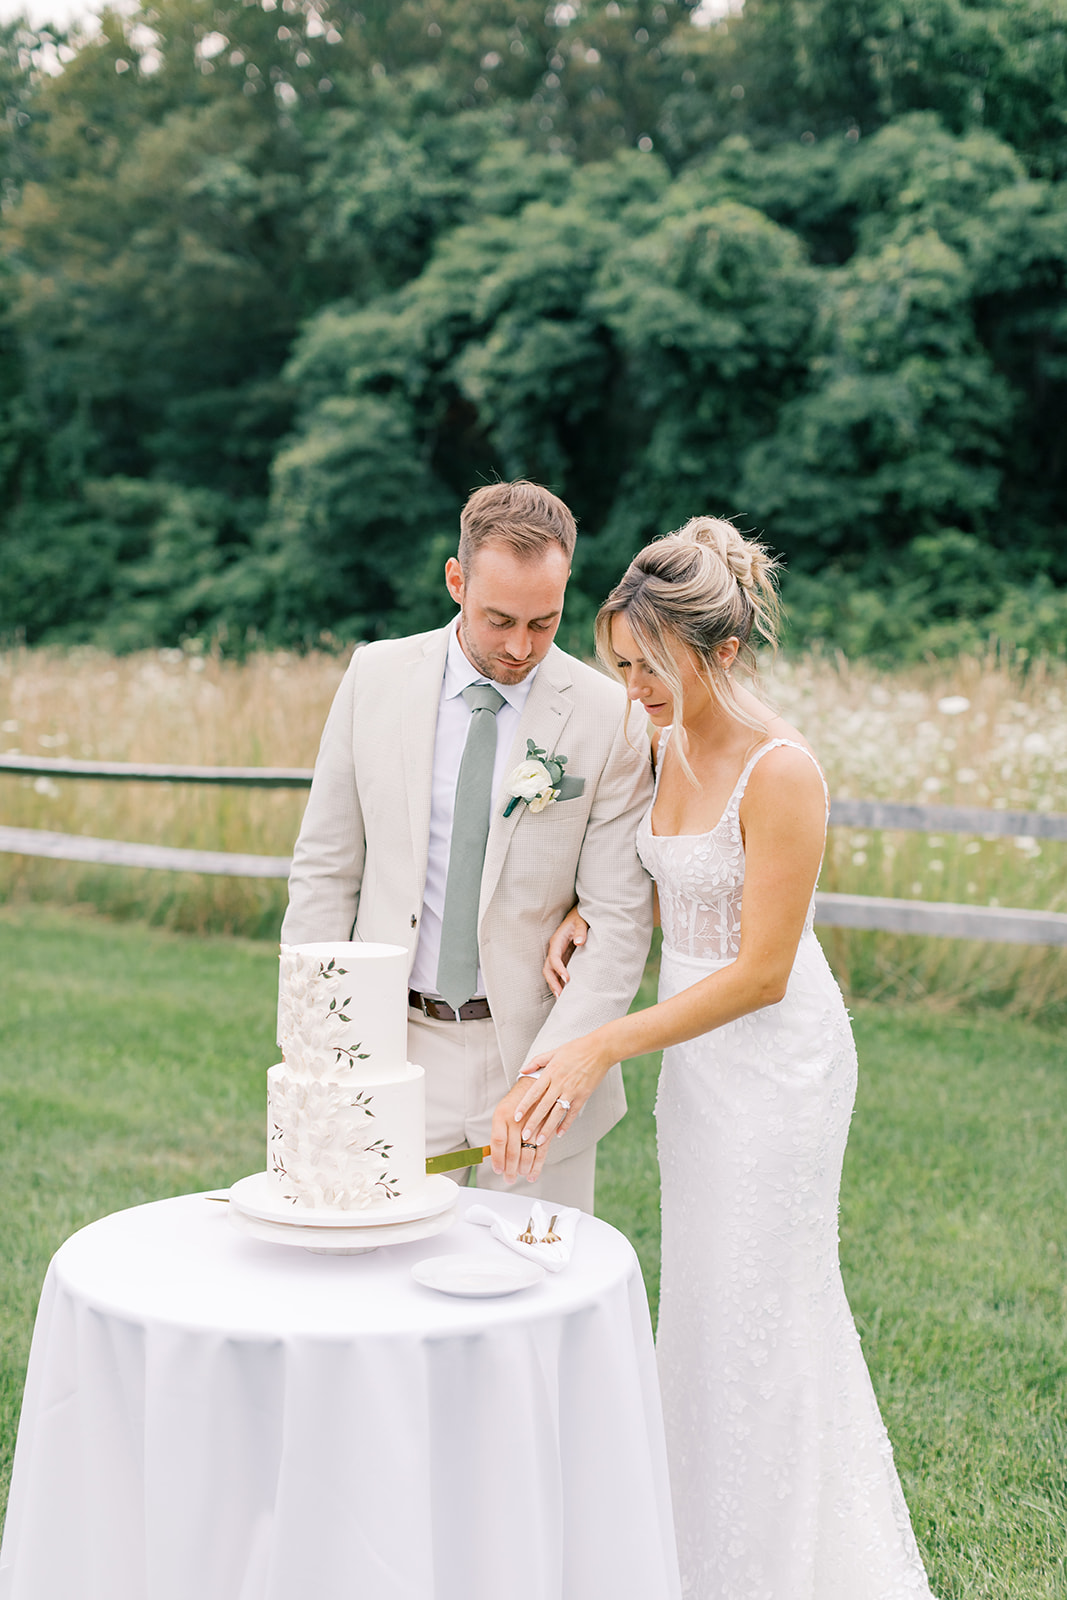 bride and groom cutting custom floral cake with field in the background